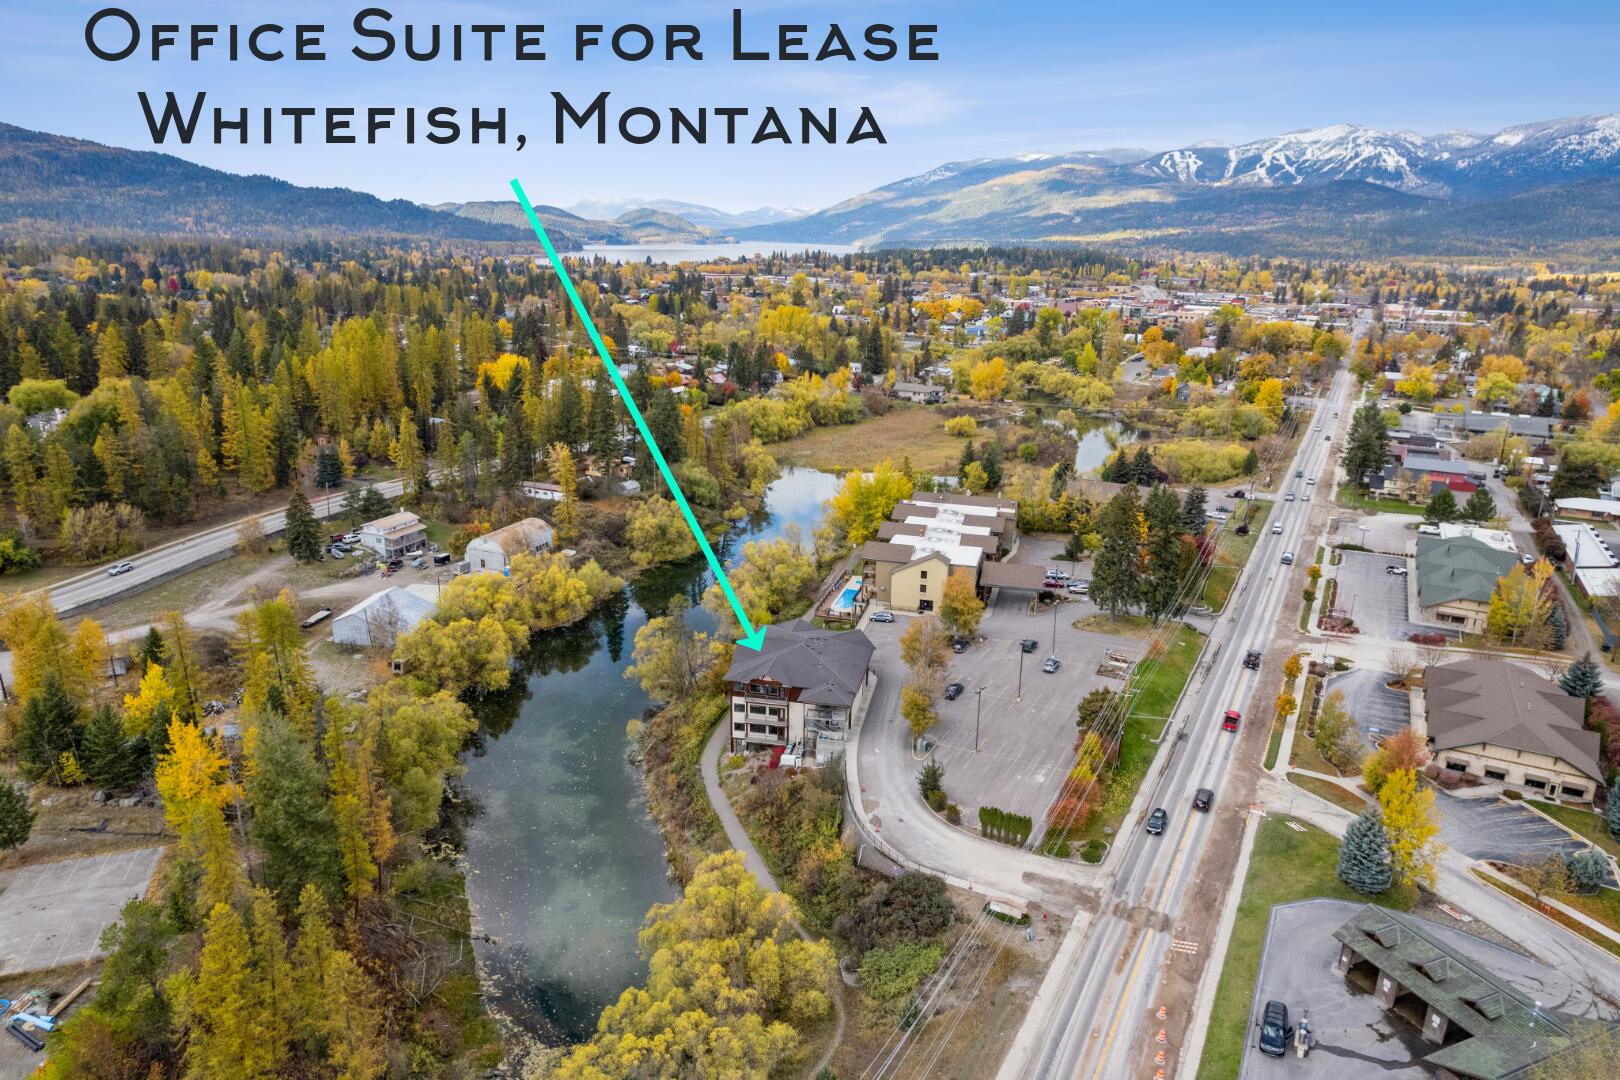 This Class A Medical-Office Space is perfectly suited for tech industry related businesses. With prime location and easy access to the Whitefish River Trail, downtown, restaurants, pubs, shopping, and skiing, this office space is sure to be a great advantage for the business. The 3 phase electric power and 3 phase backup generator, as well as the elevator served floors and two restrooms on each floor, make this office space an ideal choice for businesses looking to lease. Come take a look at this rare opportunity for professional office space. Call Bret Richmond at 406.210.0230 or Mike Henry at 406.253.2453 or Cory Richmond at 406.249.2537 or your real estate professional. Construction Materials Other: YES; Tenant Pays Other: Pass through-Base Yr